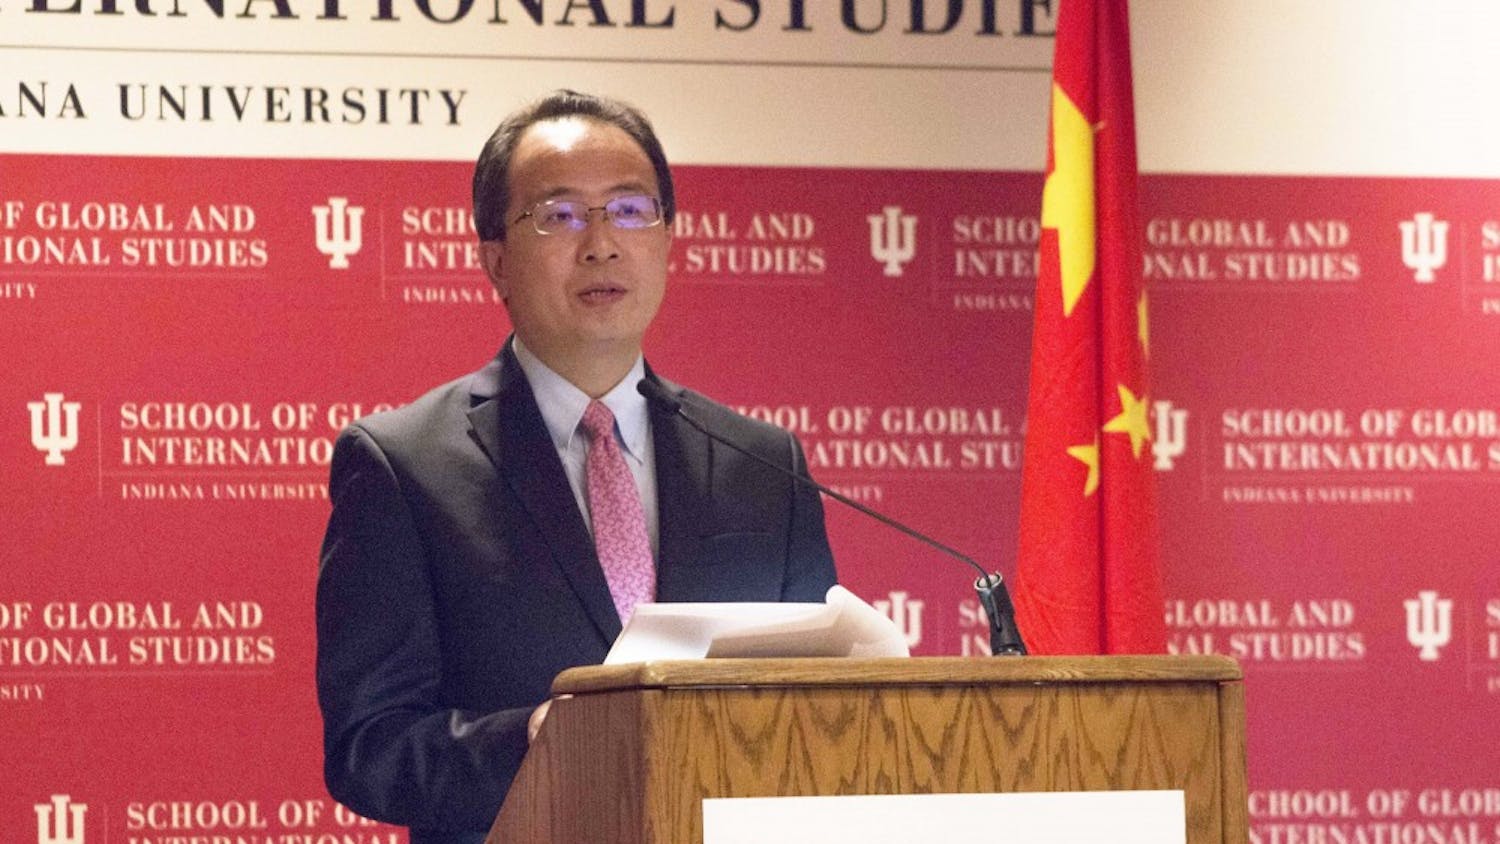 Hong Lei, the consul general of the People's Republic of China in Chicago, gives a speech on China's recent advances and the relationship between China and the United States on Monday afternoon in the IU Auditorium. Lei spent the day on IU's campus meeting with students and faculty.